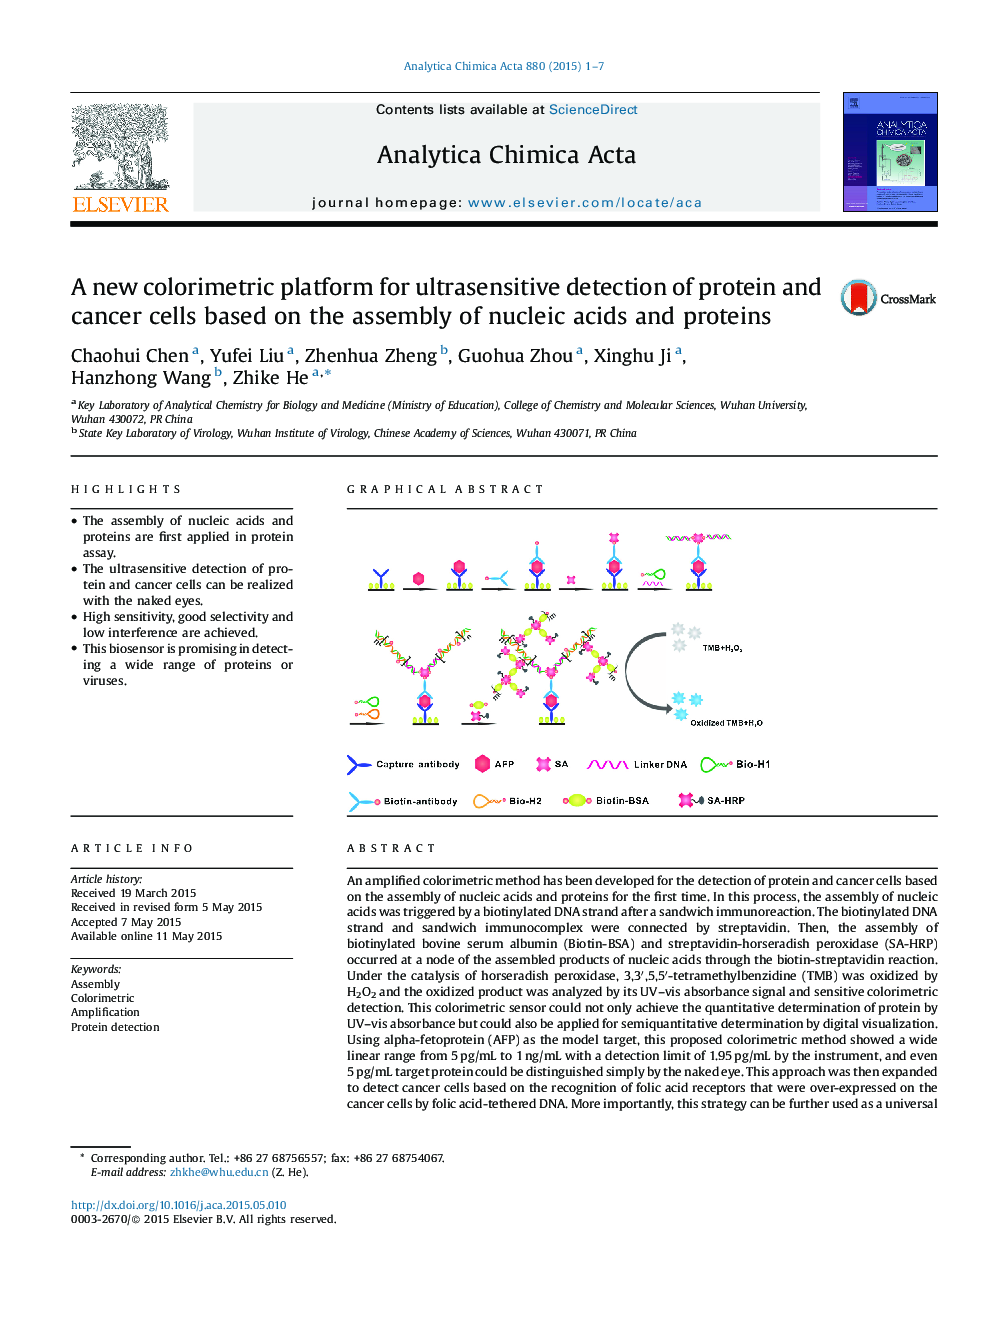 A new colorimetric platform for ultrasensitive detection of protein and cancer cells based on the assembly of nucleic acids and proteins